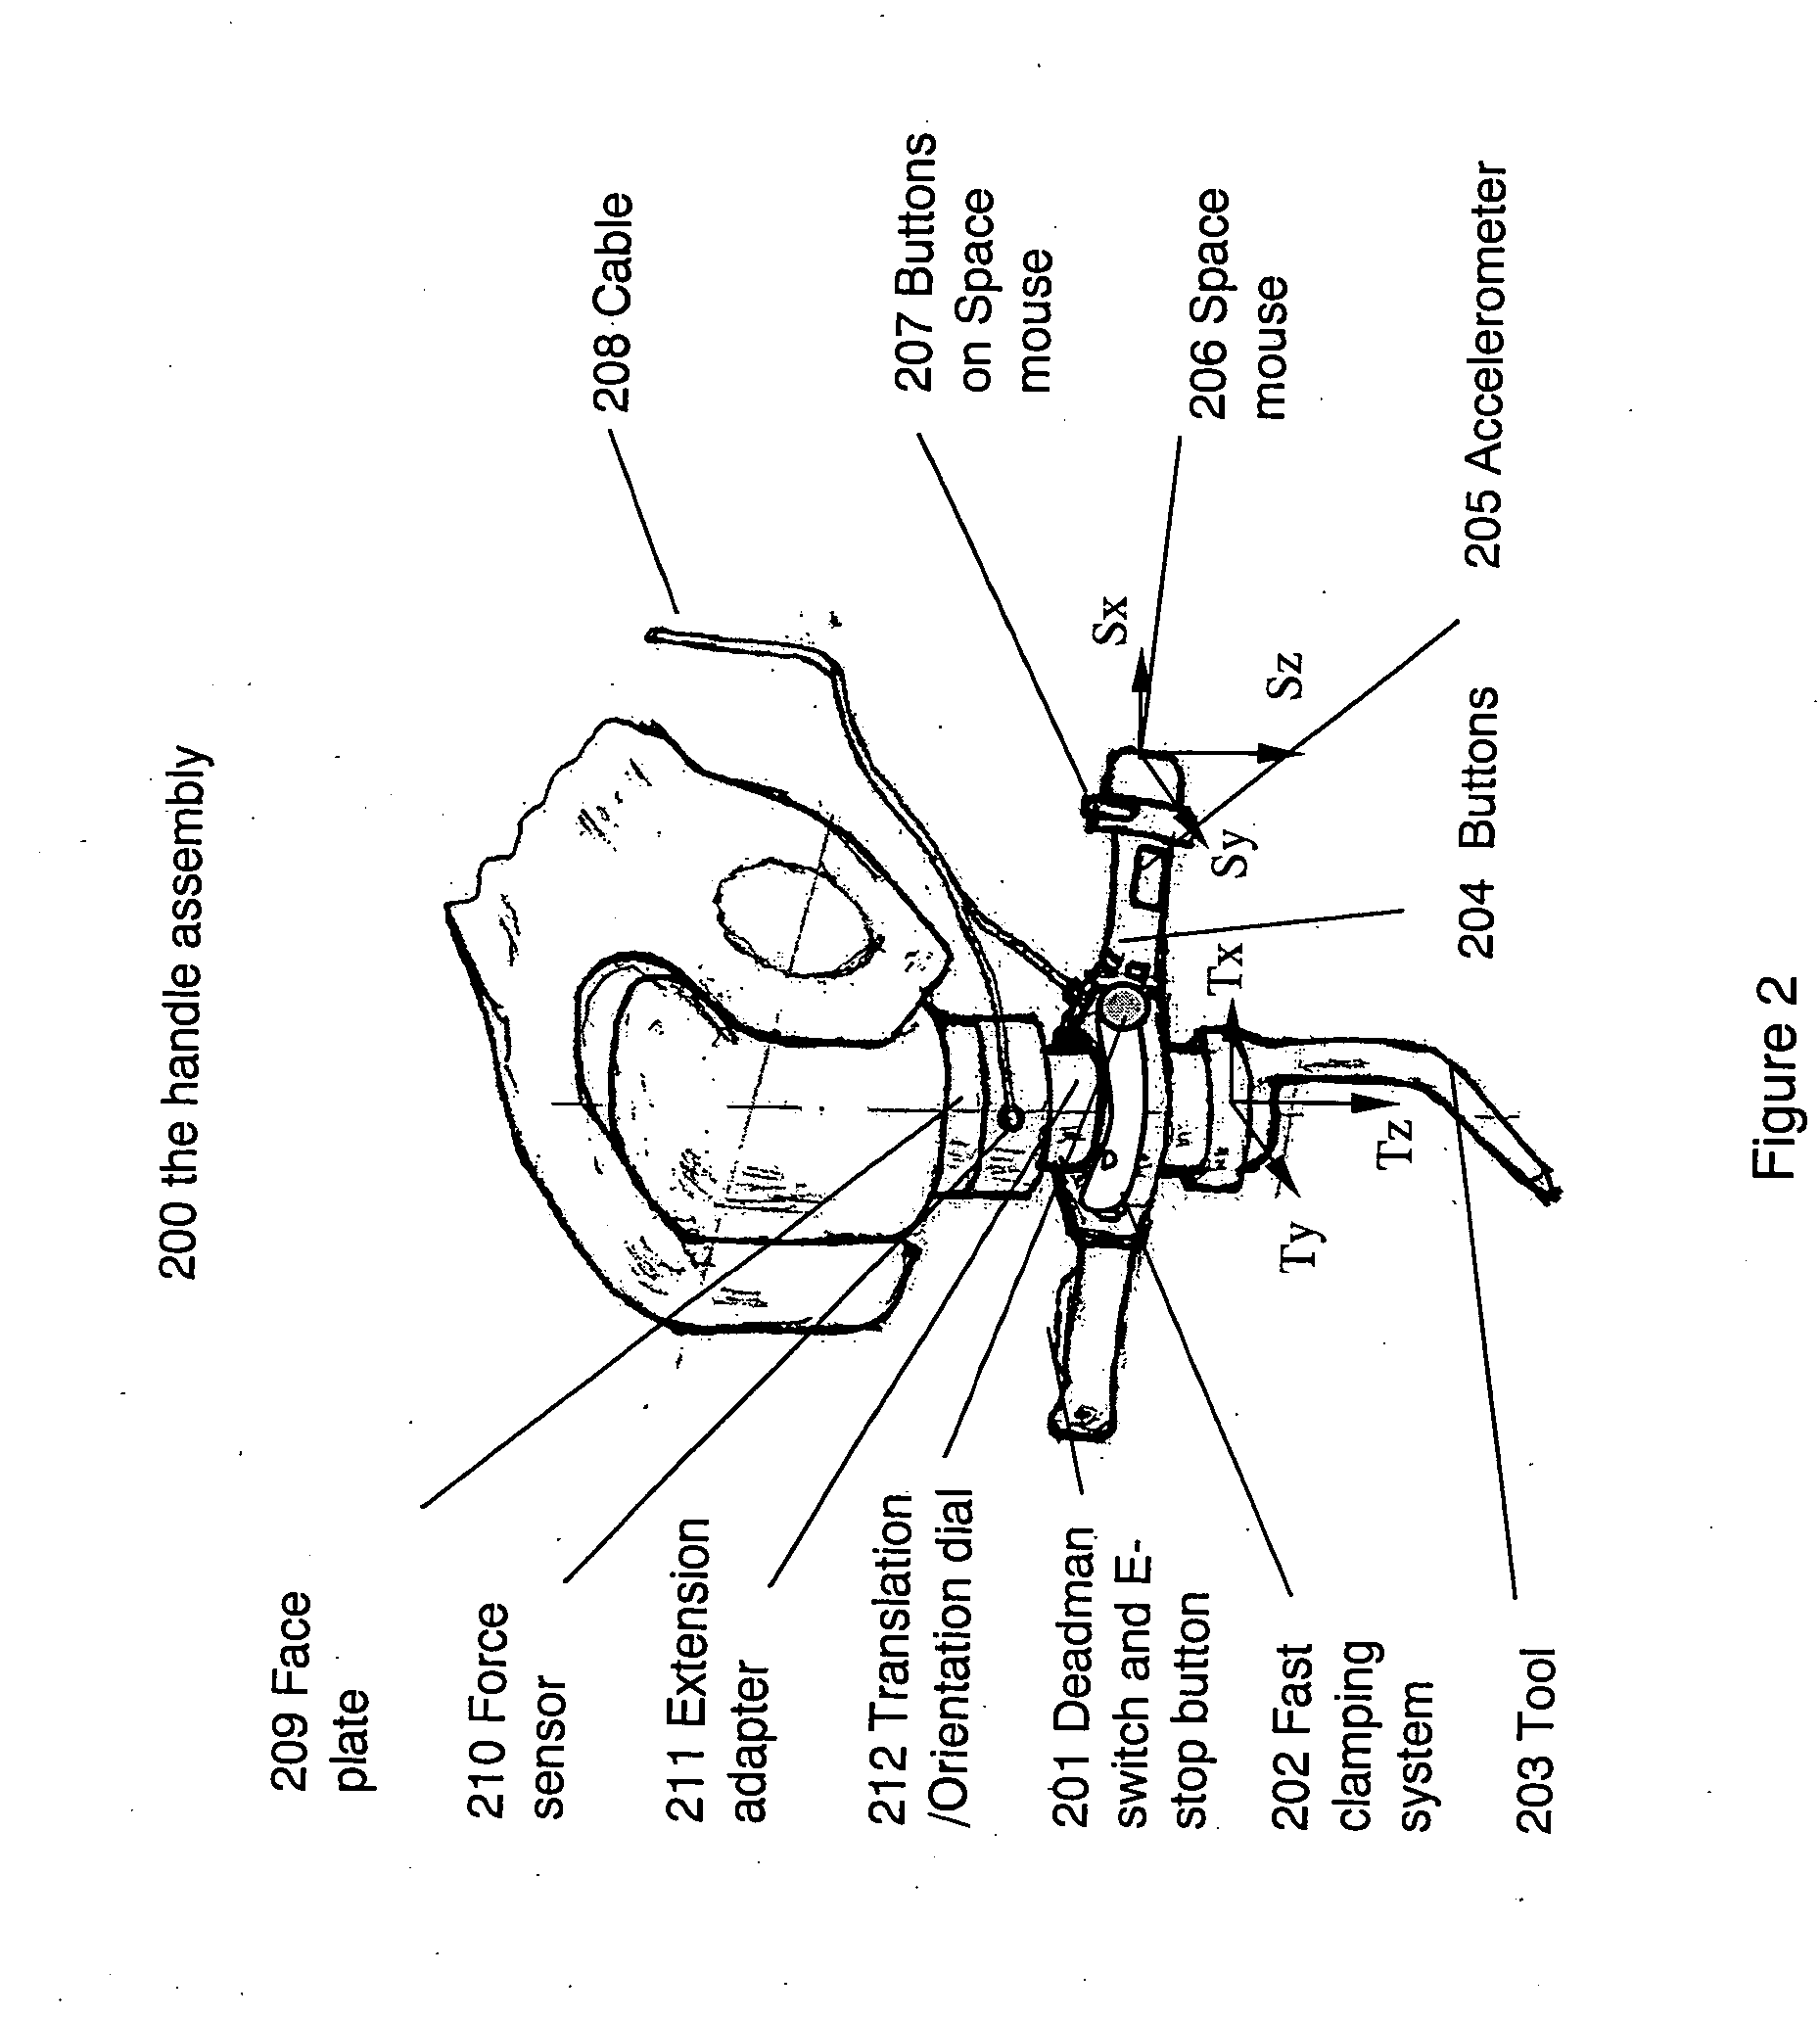 Accelerometer to monitor movement of a tool assembly attached to a robot end effector